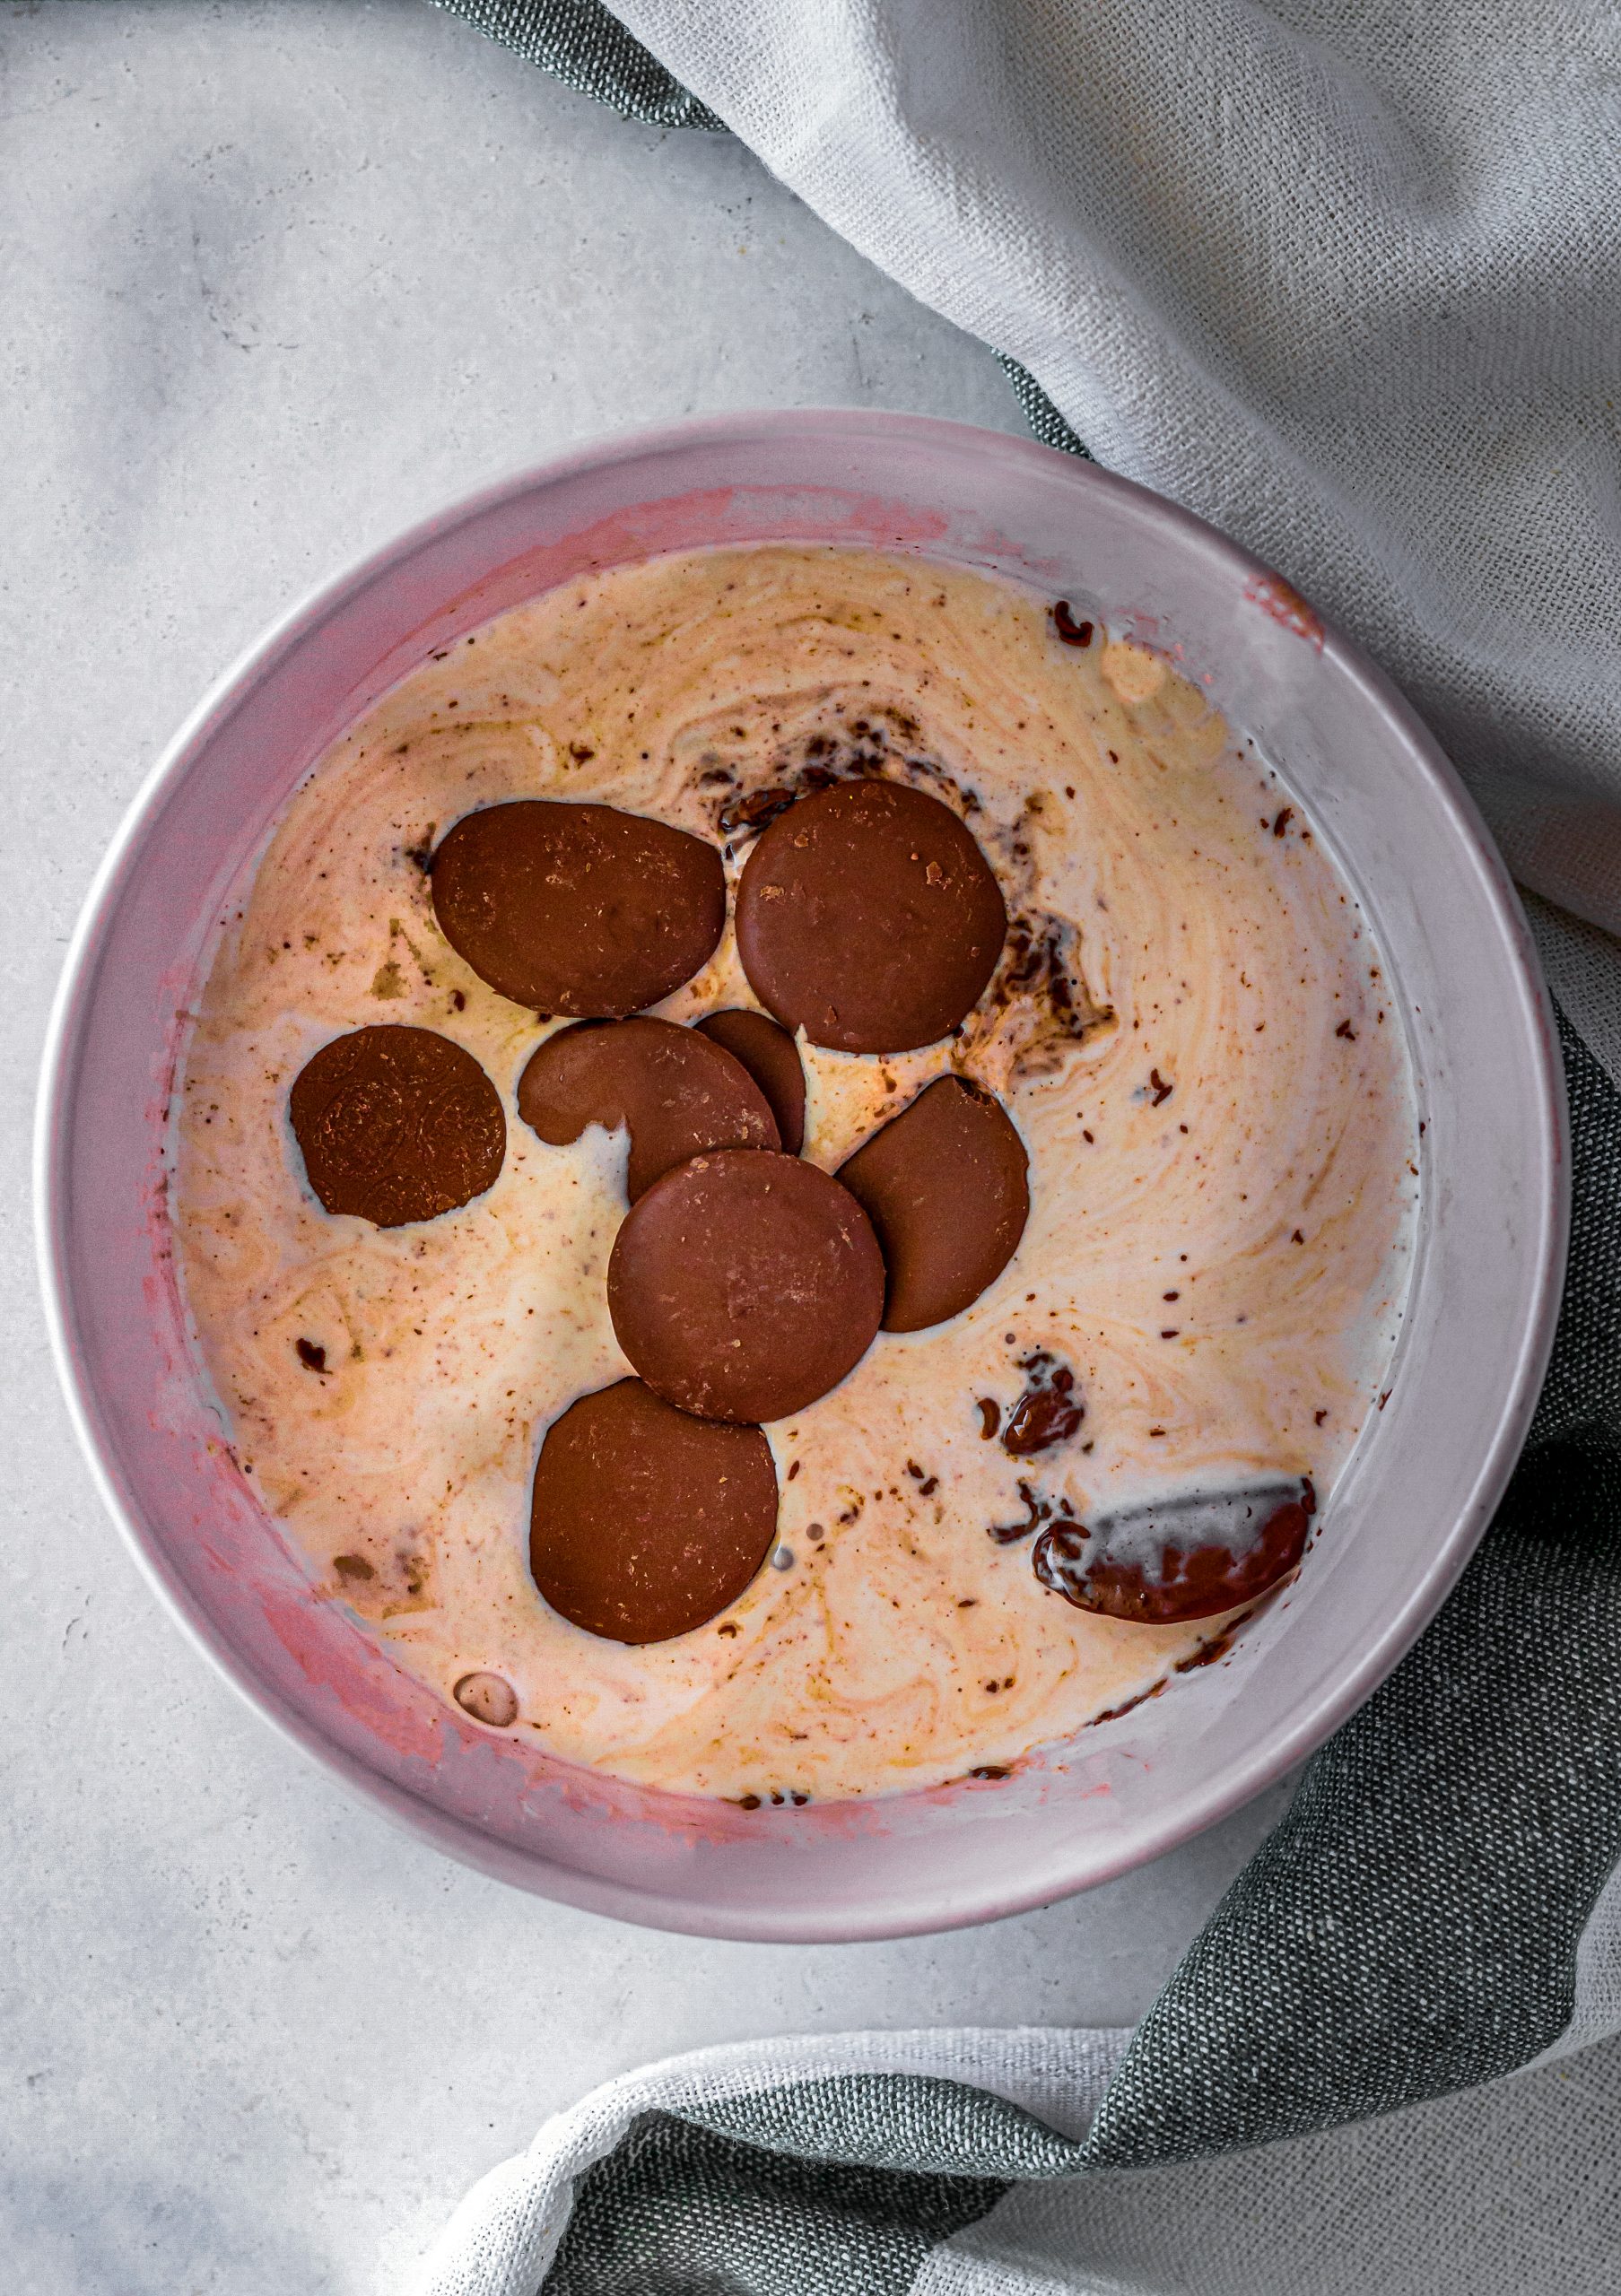 Add the ¼ cup of heavy whipping cream and chocolate chips to a bowl that is microwave safe